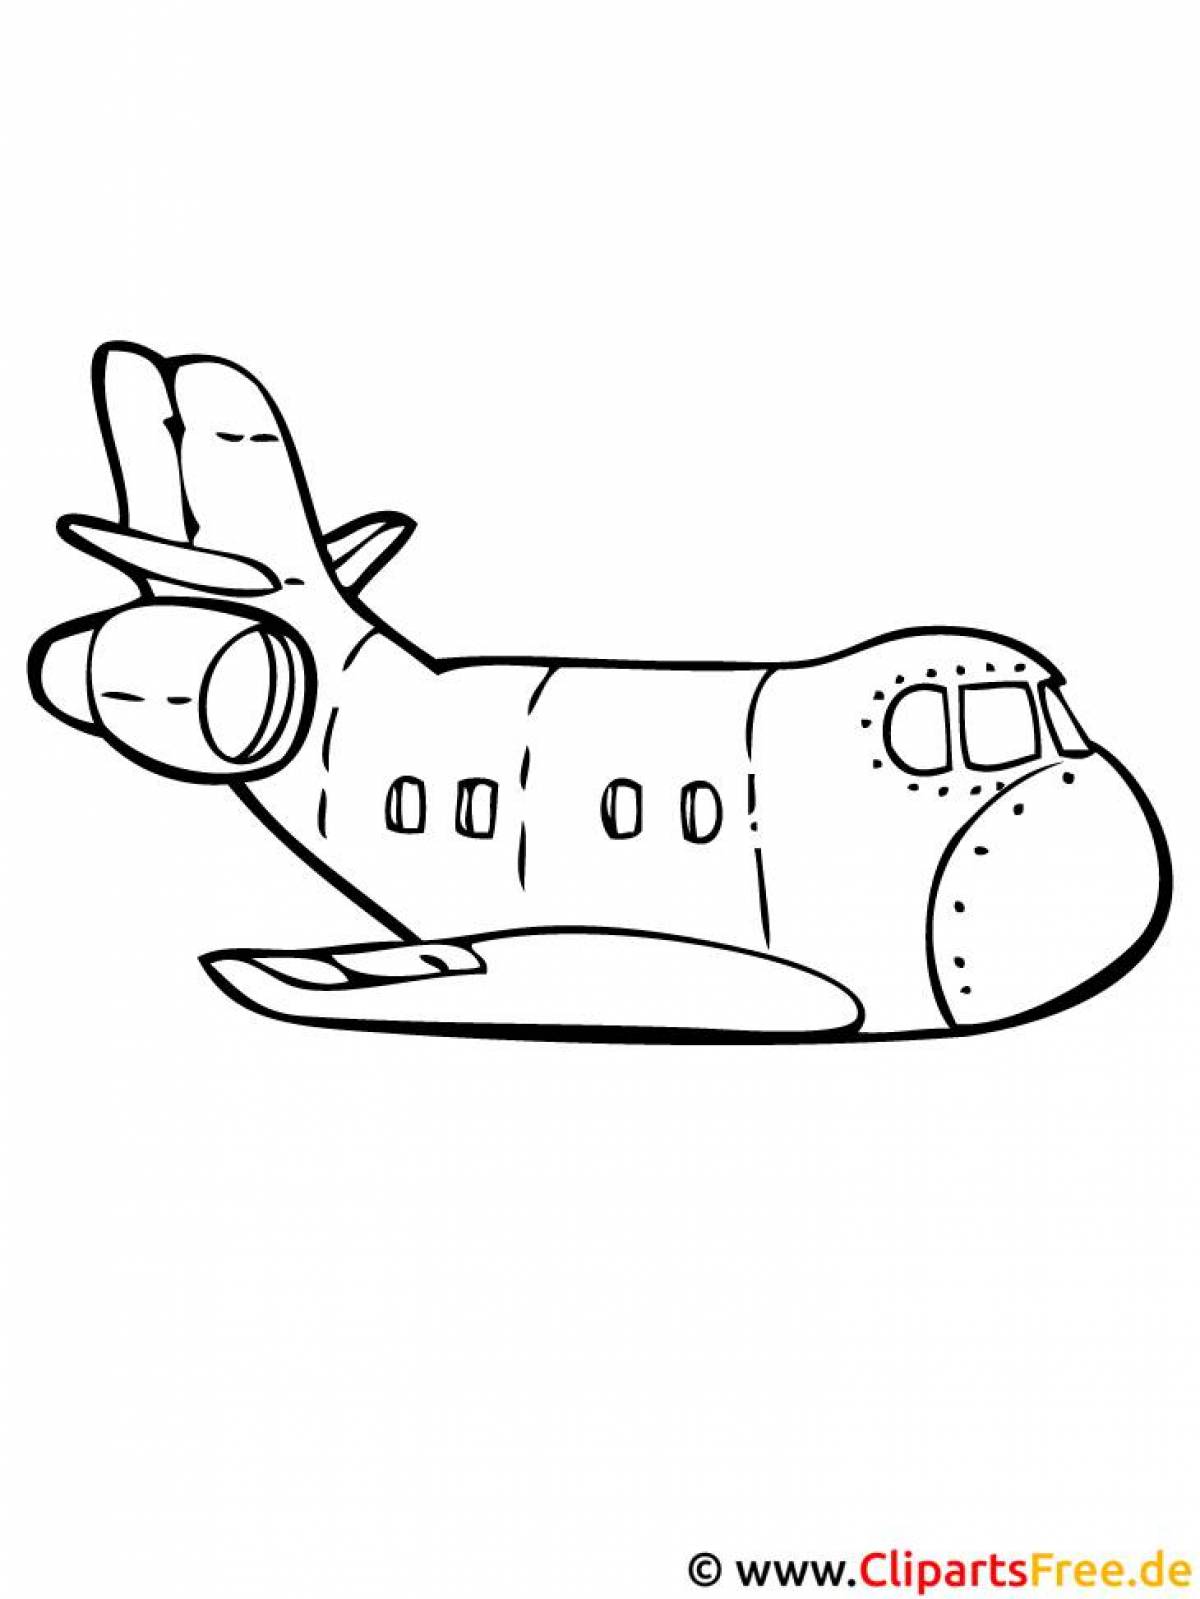 Exquisite plane coloring book for 3-4 year olds